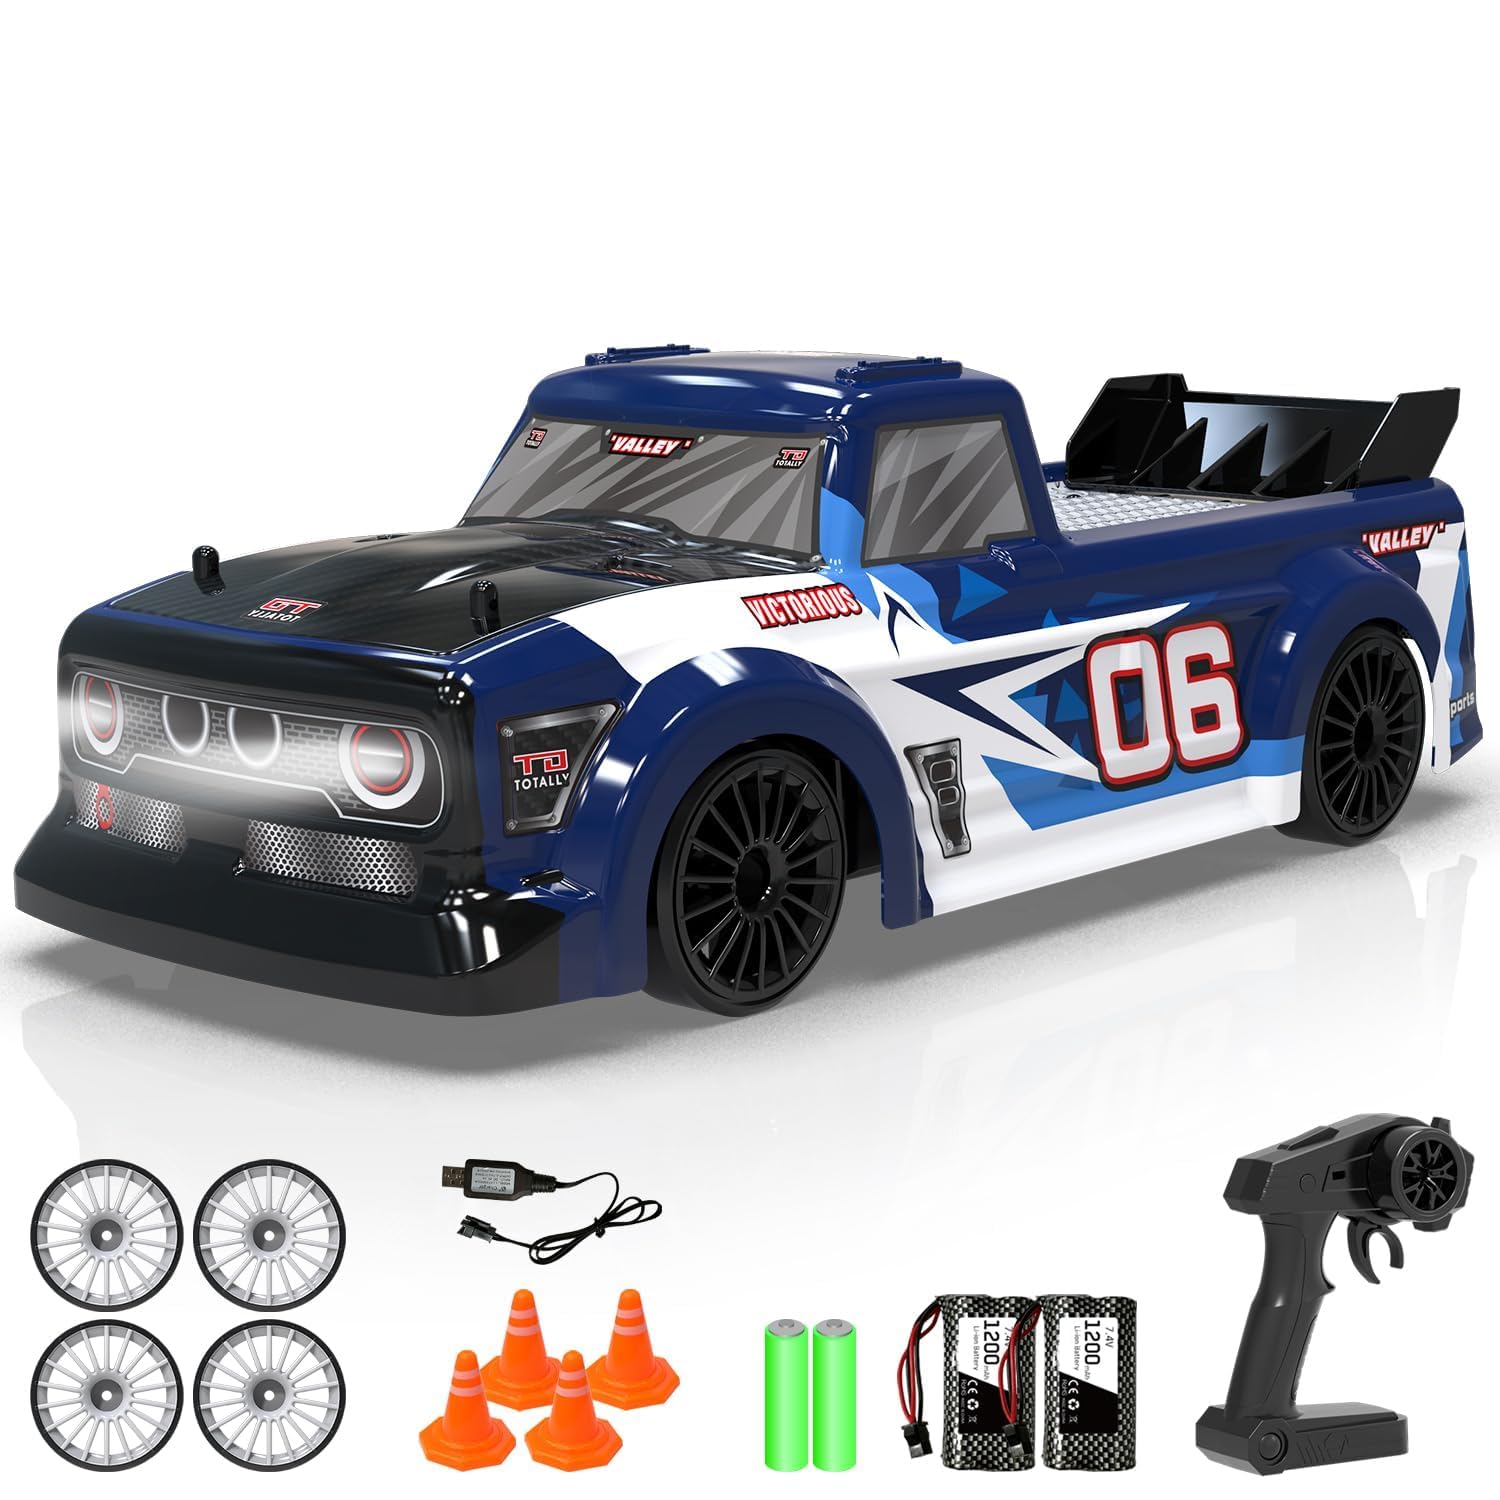 RACENT RC Car 1:14 4WD Remote Control Drift Car 15MPH High Speed Vehicle Toy Trucks with Drifting & Racing Tires, 2 Rechargeable Batteries, Gifts for Boys Kids Adults